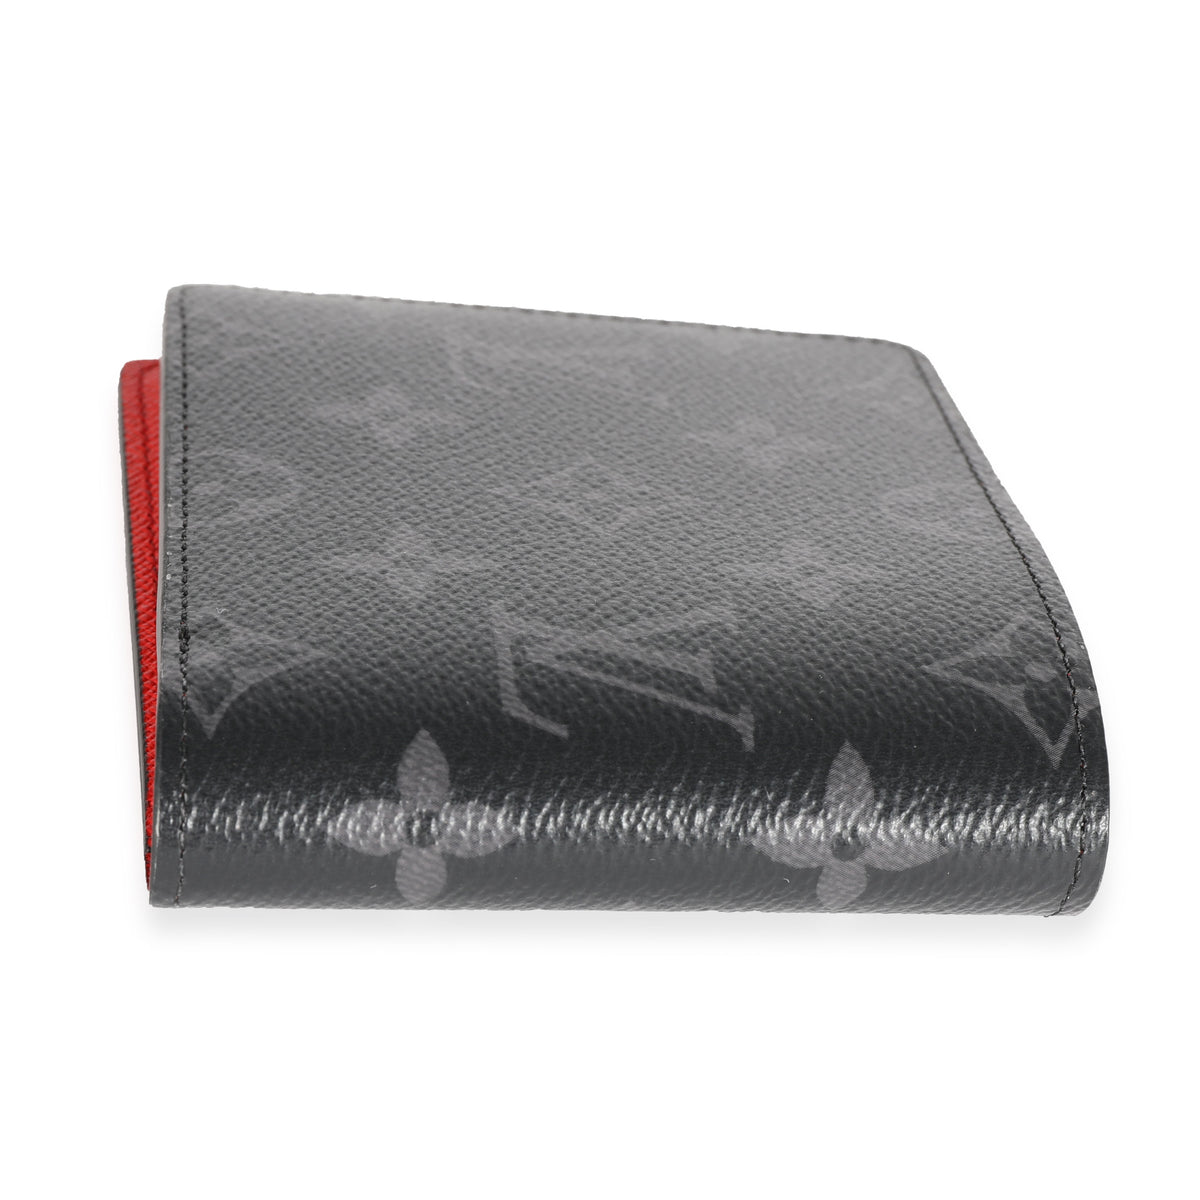 Multiple Wallet Monogram Other - Men - Small Leather Goods